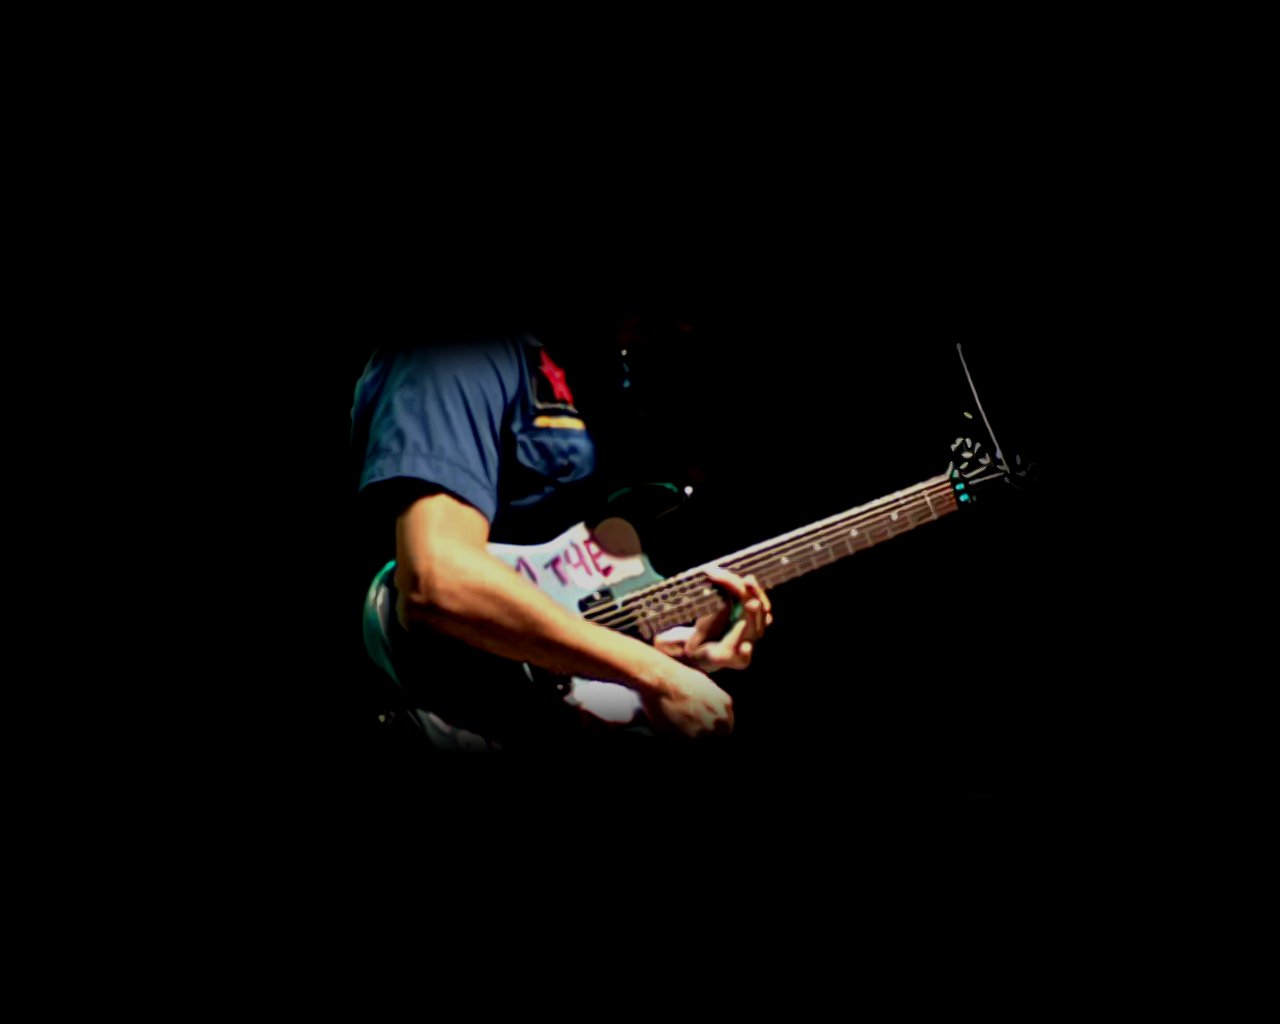 Tom Morello and ATH guitar 3 by wafel r on